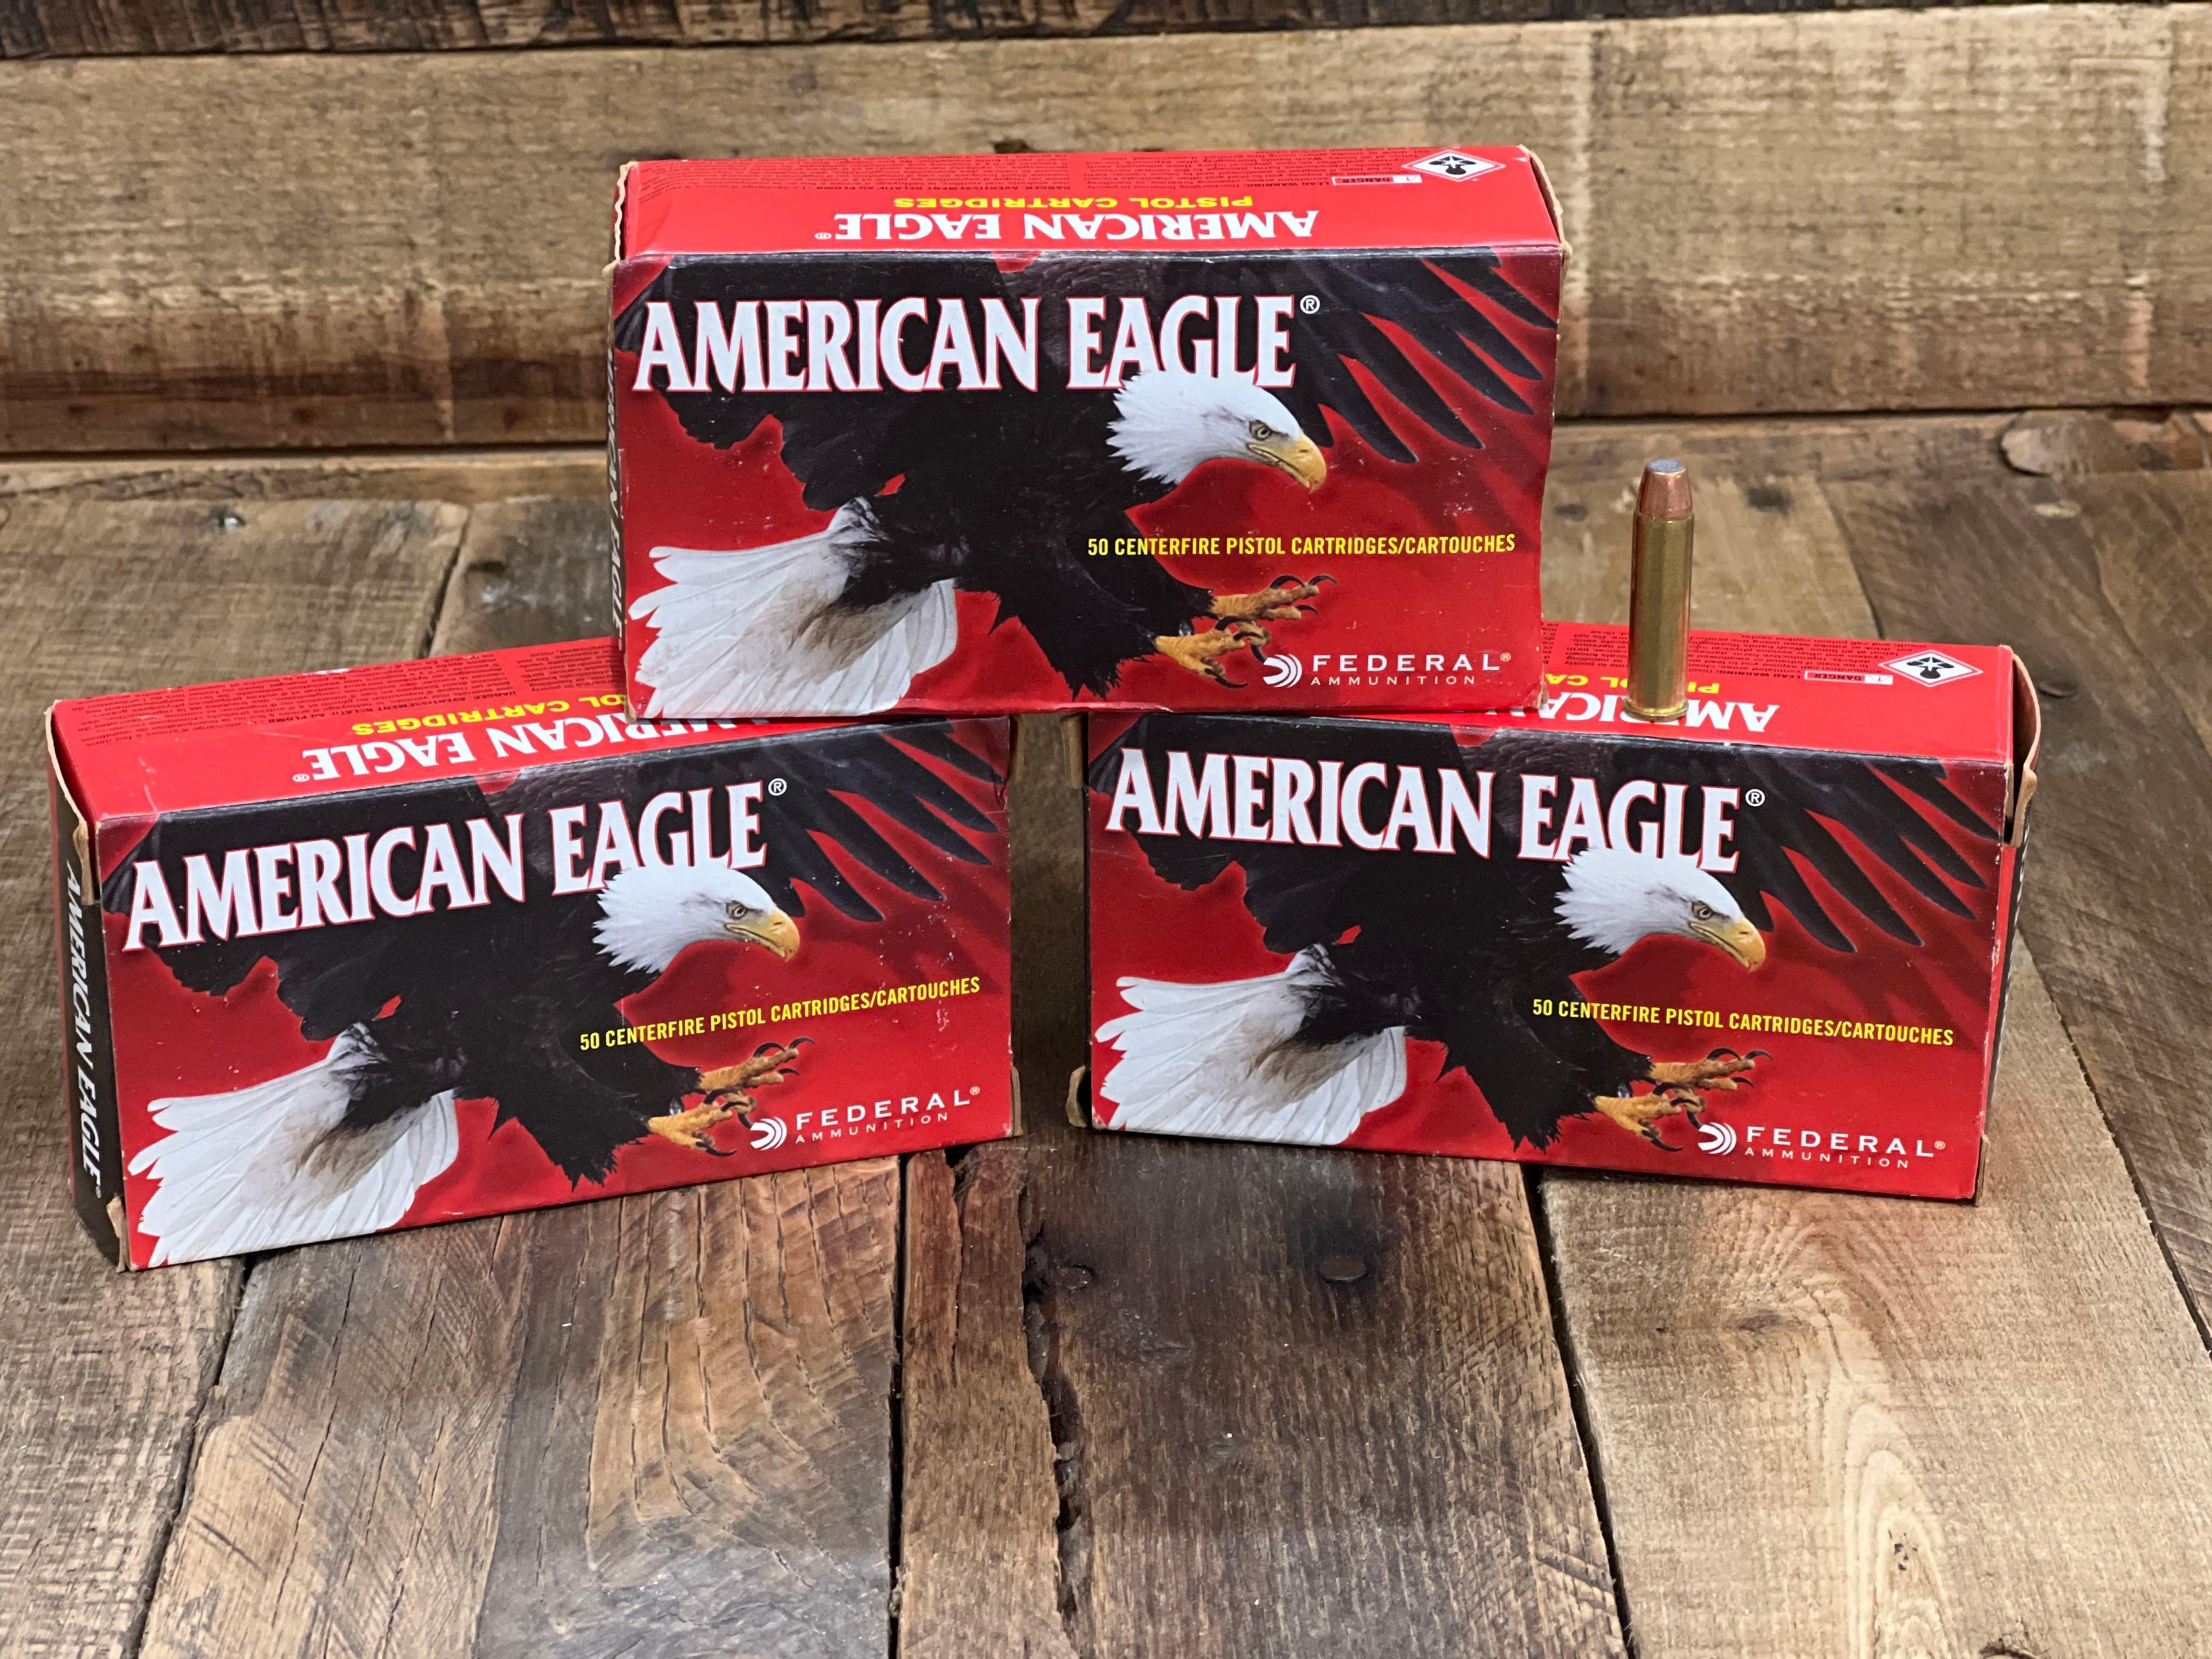 3 BOXES OF AMERICAN EAGLE 327 FEDERAL MAGNUM 85GR SOFT